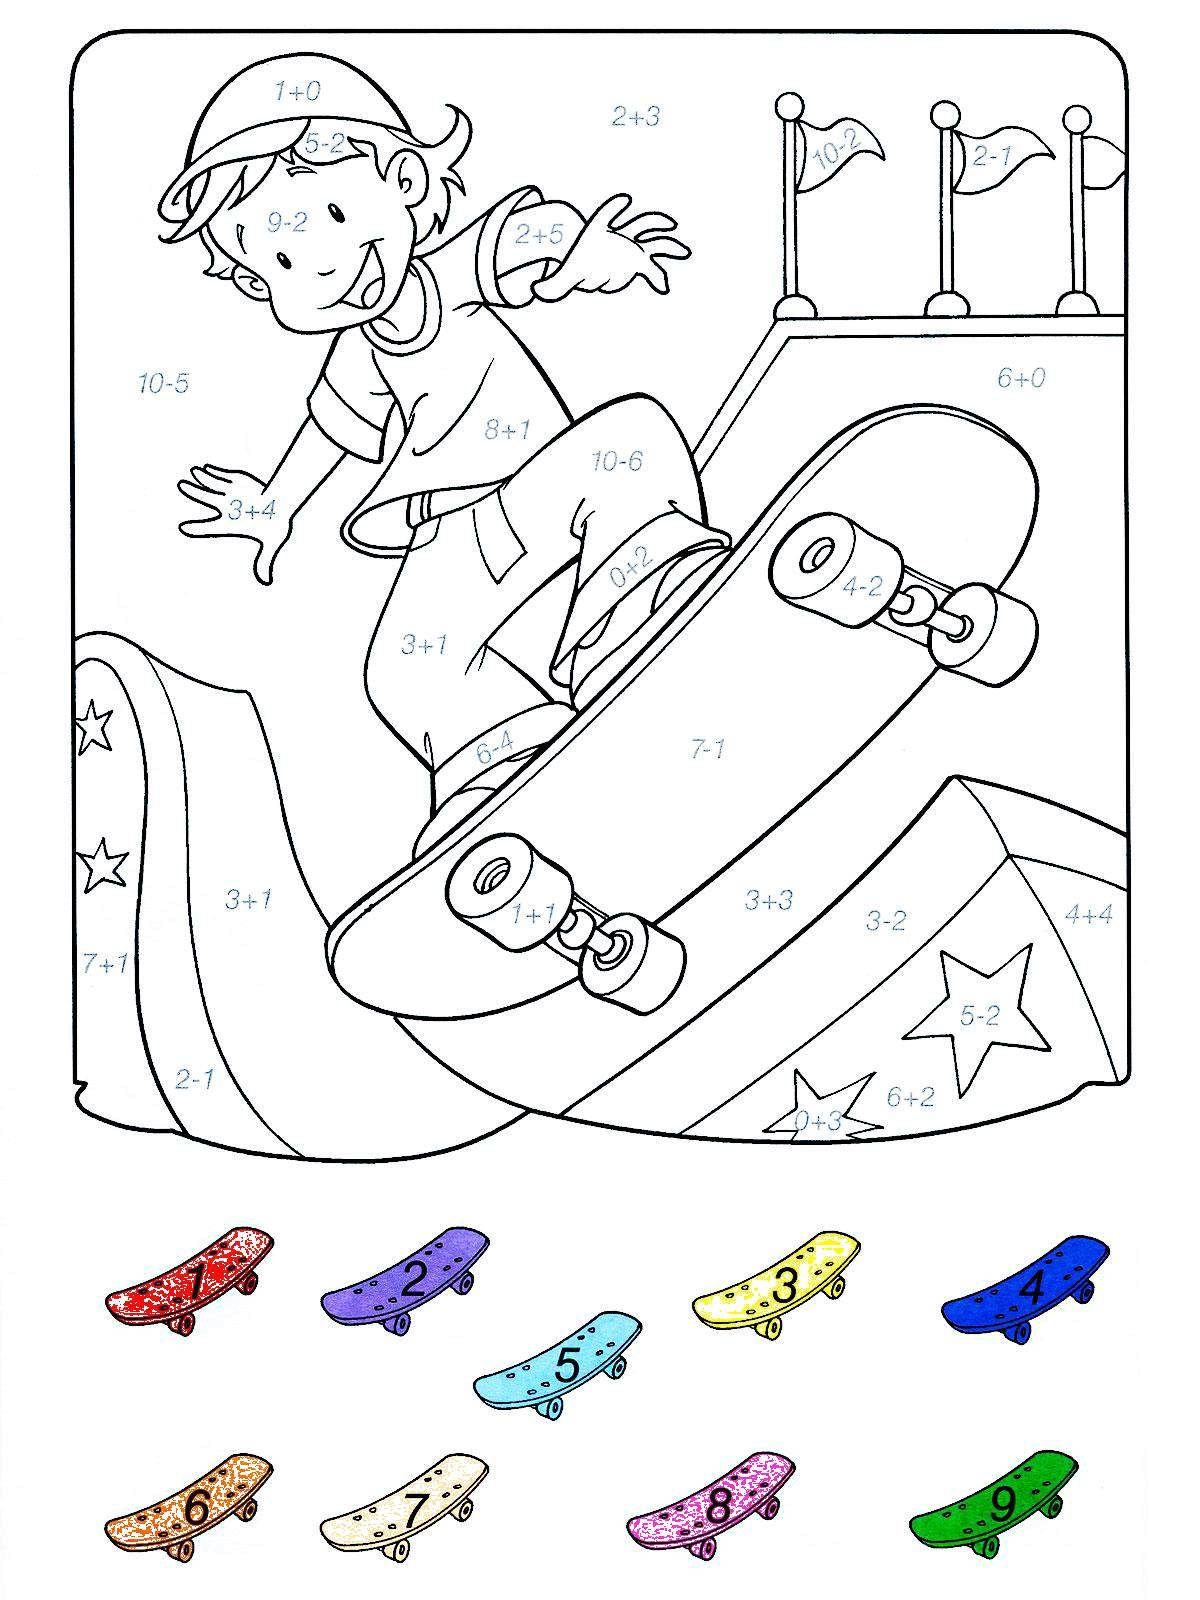 Coloring Paint a skateboarder deciding examples. Category mathematical coloring pages. Tags:  sports, skateboard, skateboarder. examples.